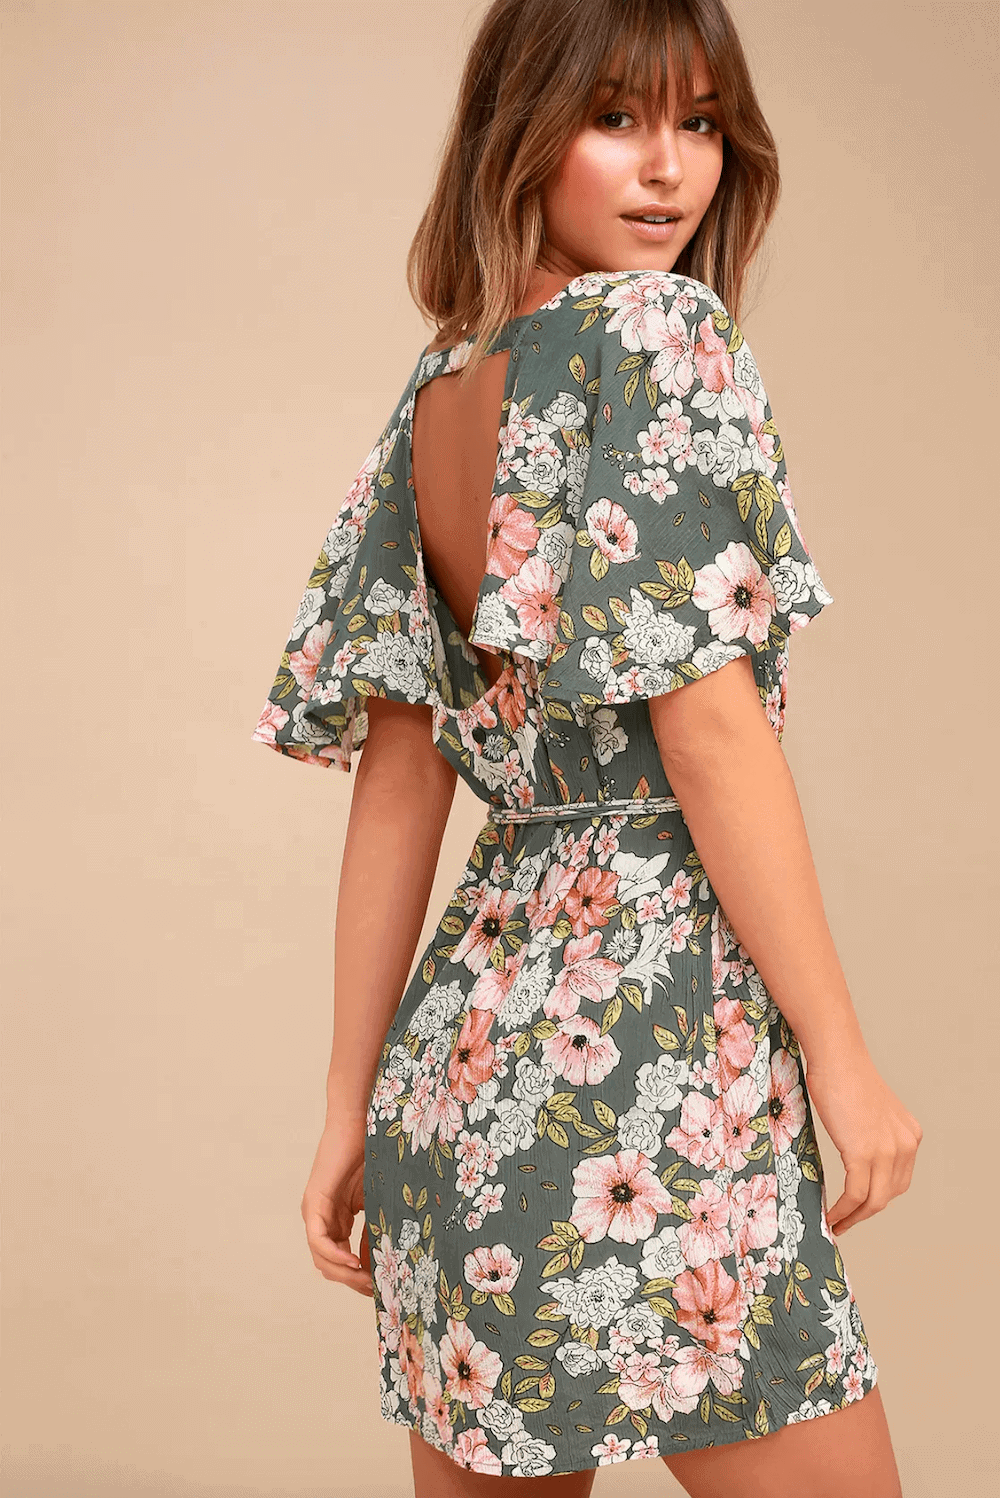 Summer Outfits for the Beach Sage Green Floral Print Mini Dress